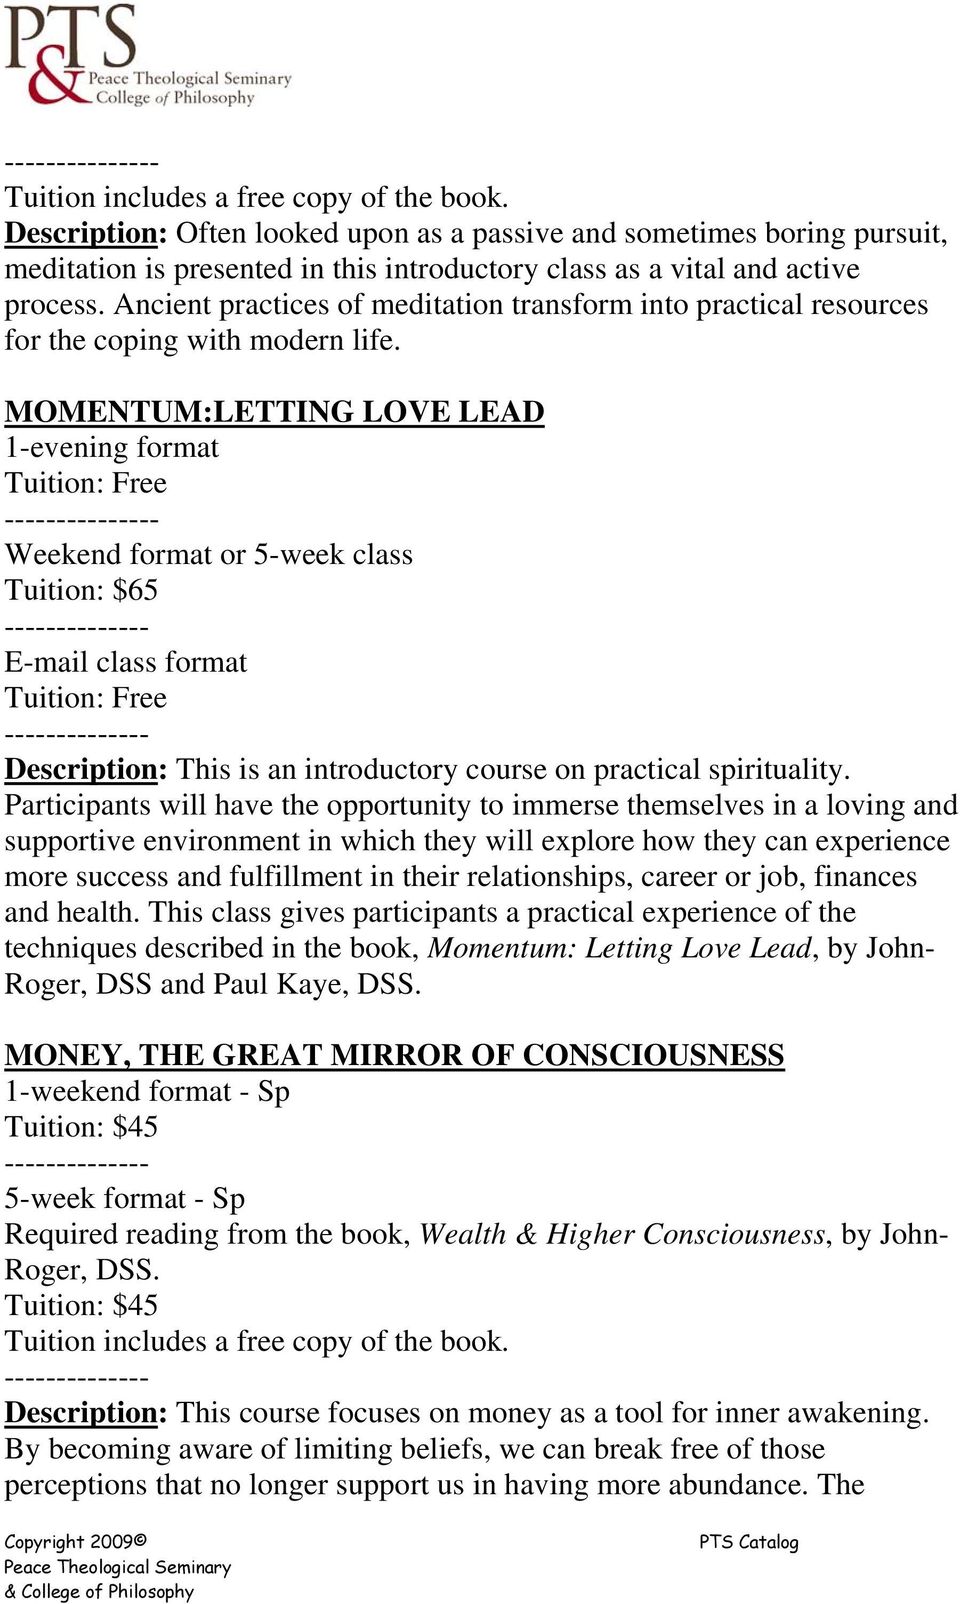 MOMENTUM:LETTING LOVE LEAD 1-evening format - Weekend format or 5-week class Tuition: $65 E-mail class format Description: This is an introductory course on practical spirituality.